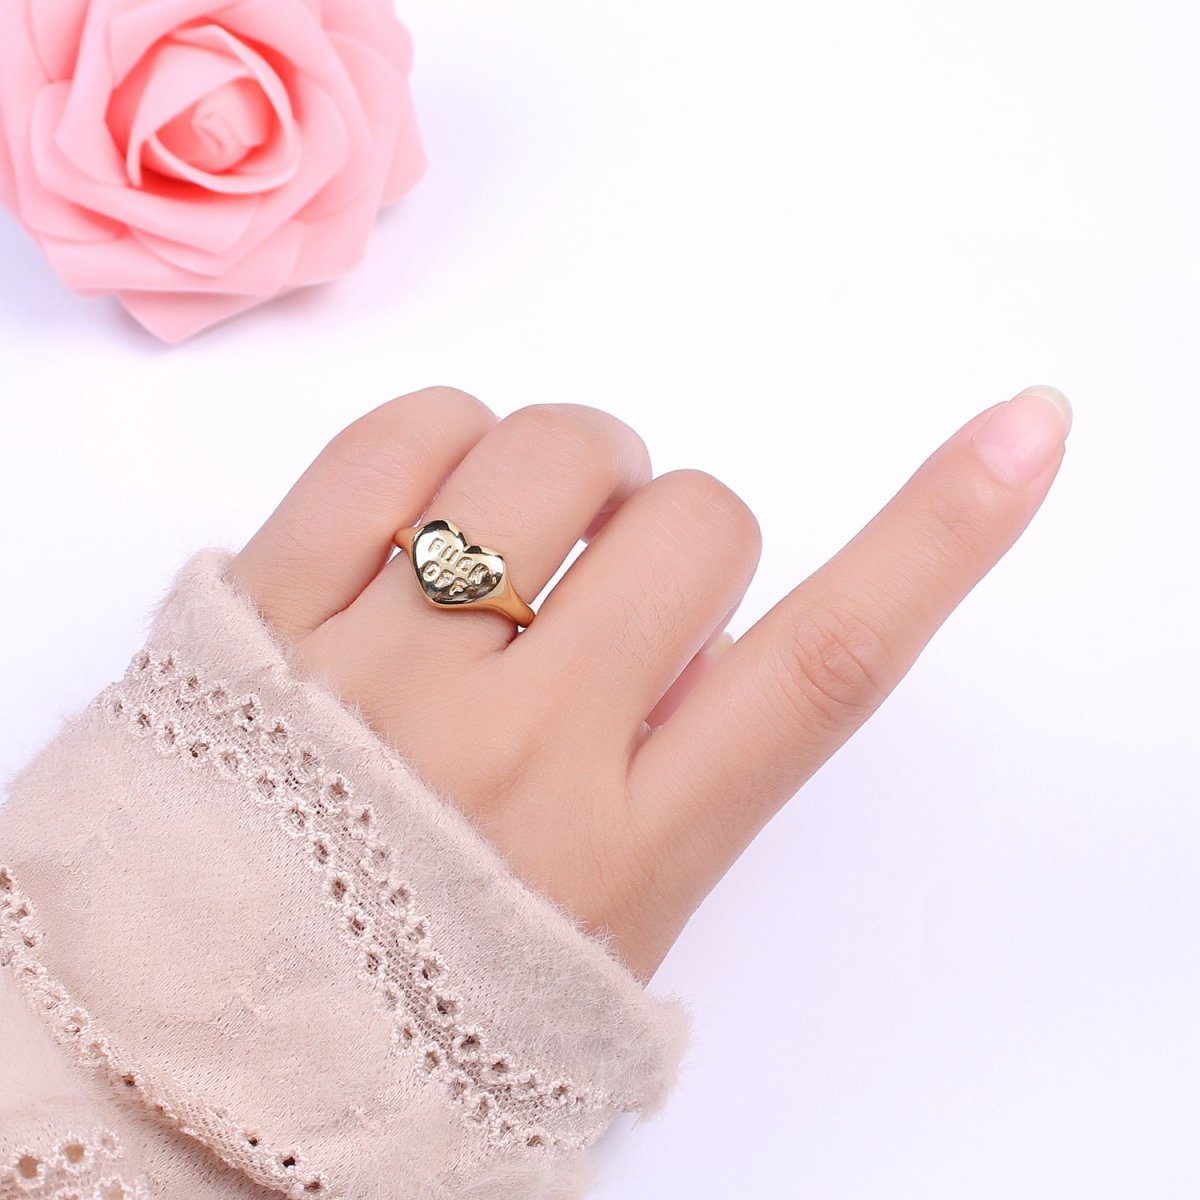 Gold Fuck Off Ring, Heart Shaped Signet, Fuckoff rings oval signet ring gold rings for women U-132 - DLUXCA